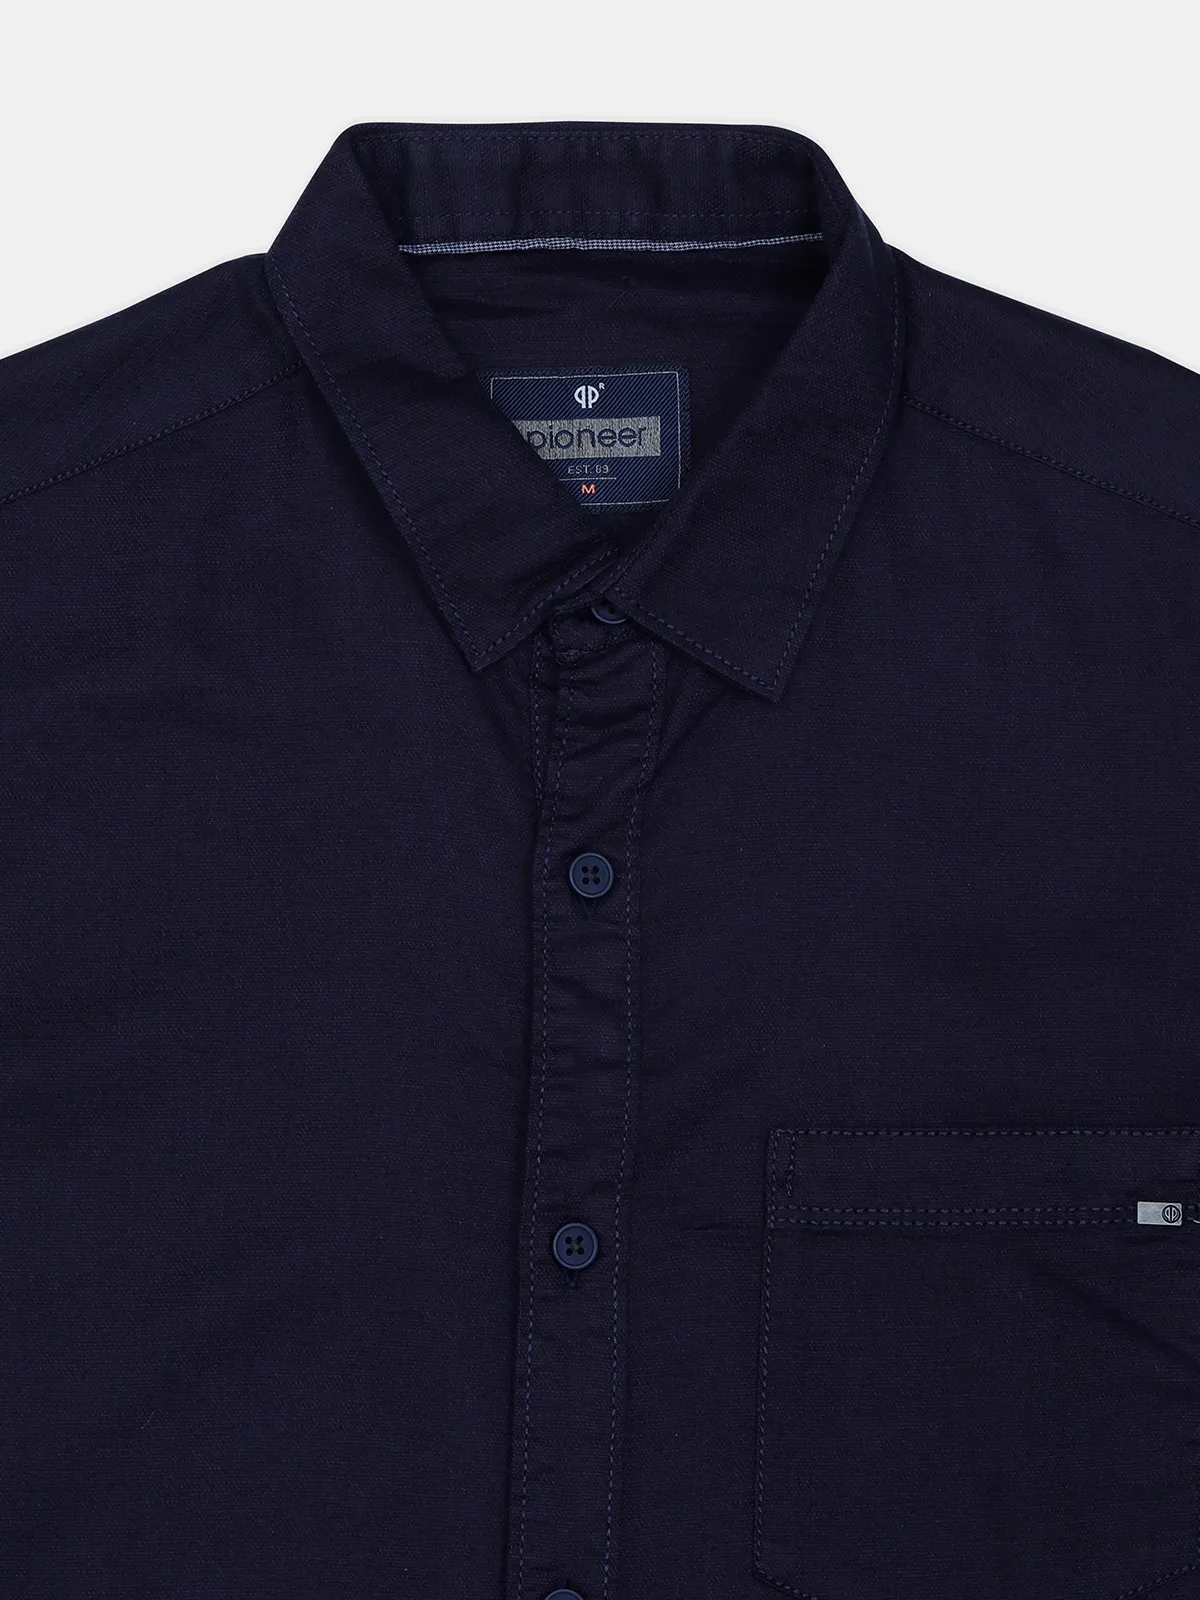 Pioneer solid cotton casual shirt in navy